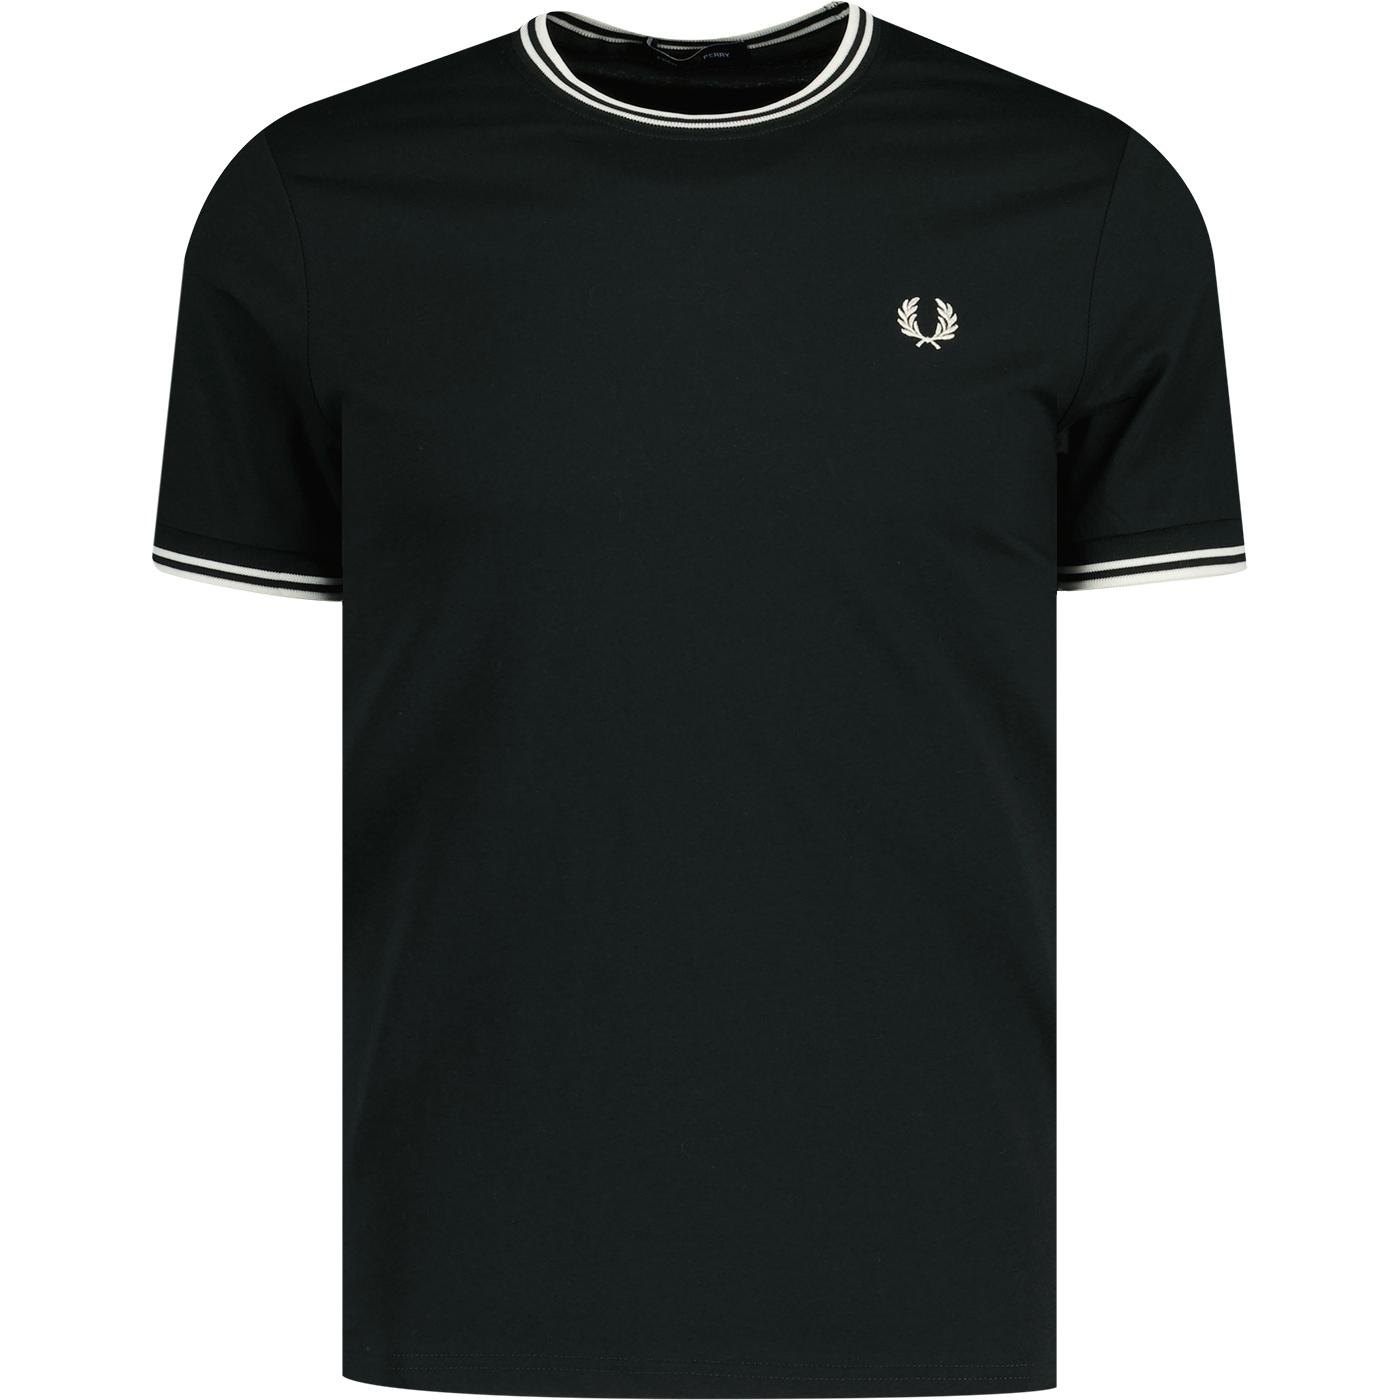 M1588 Fred Perry Retro Mod Twin Tipped T-Shirt NG